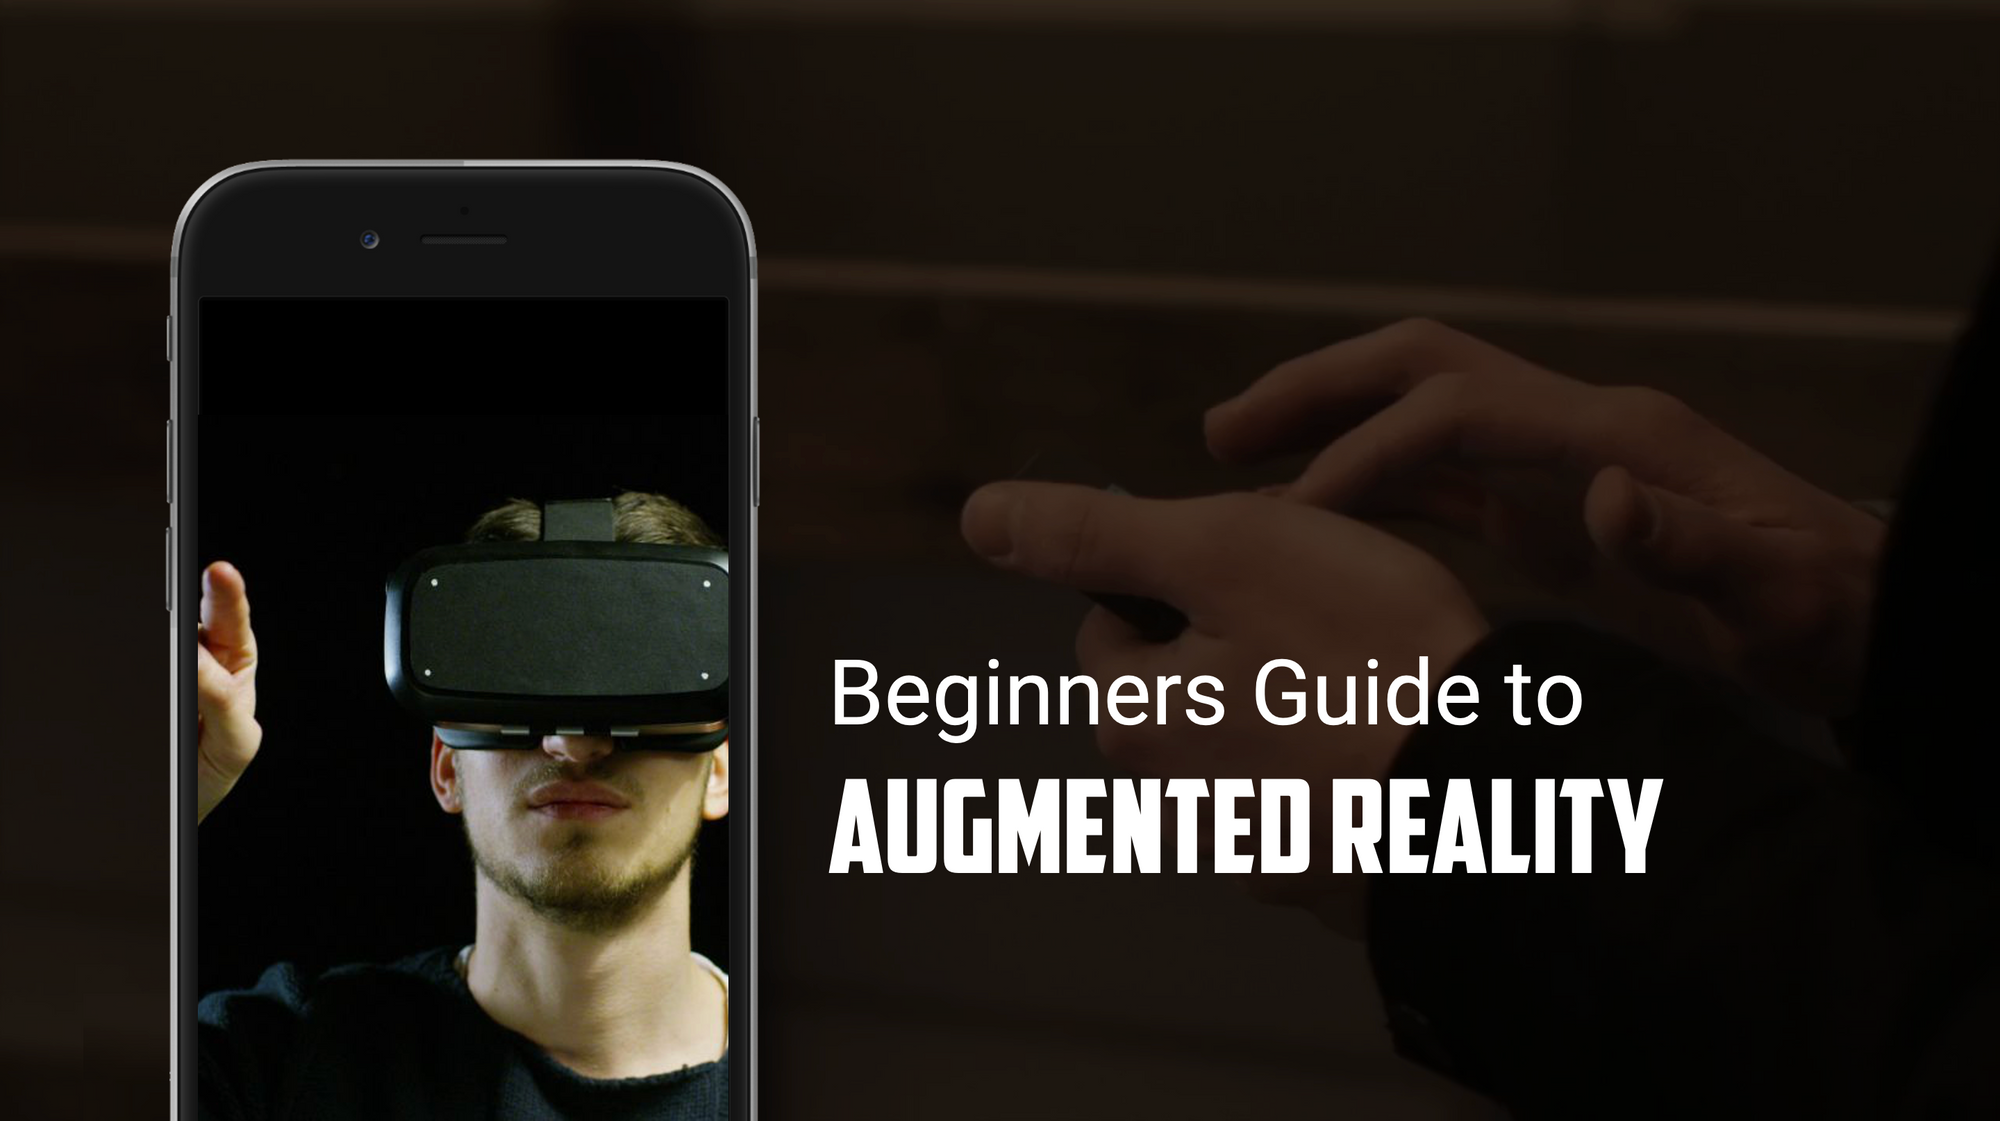 Building Augmented Reality Applications with Hand Tracking